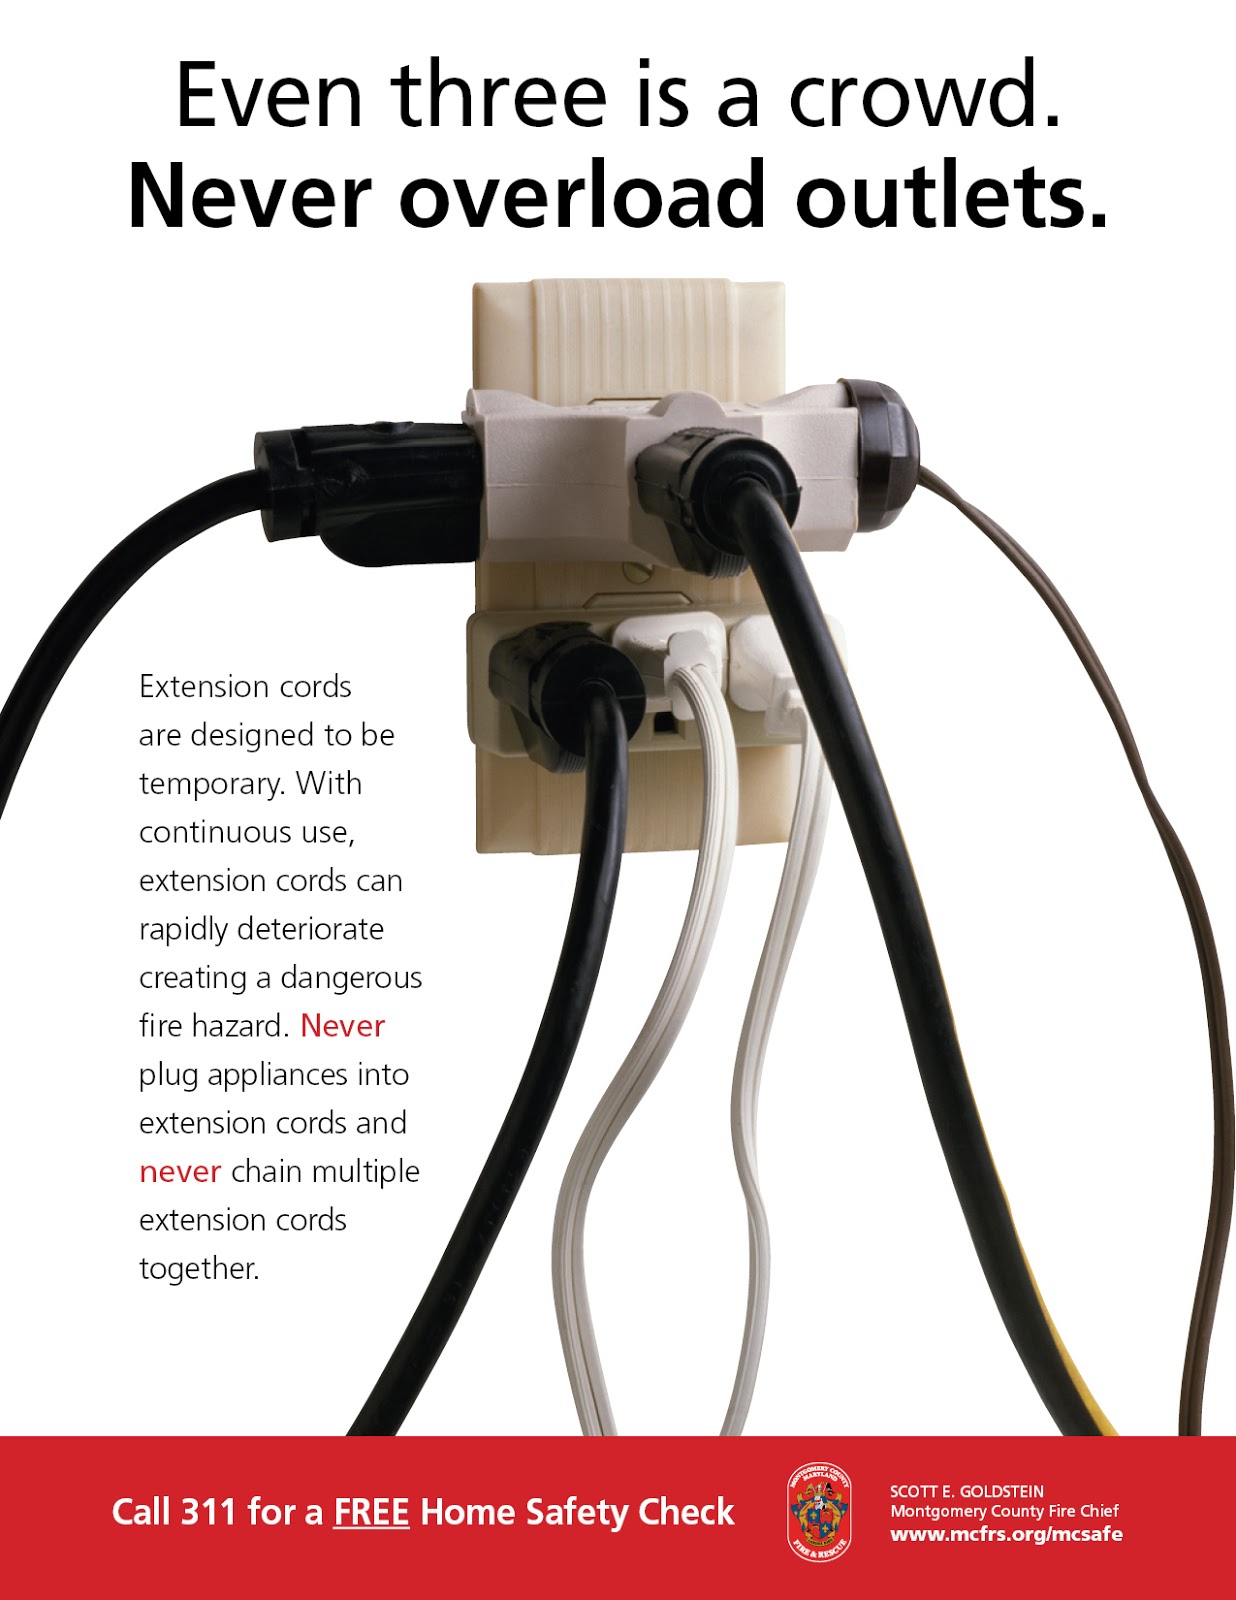 Electrical Cord Safety, what you need to know?